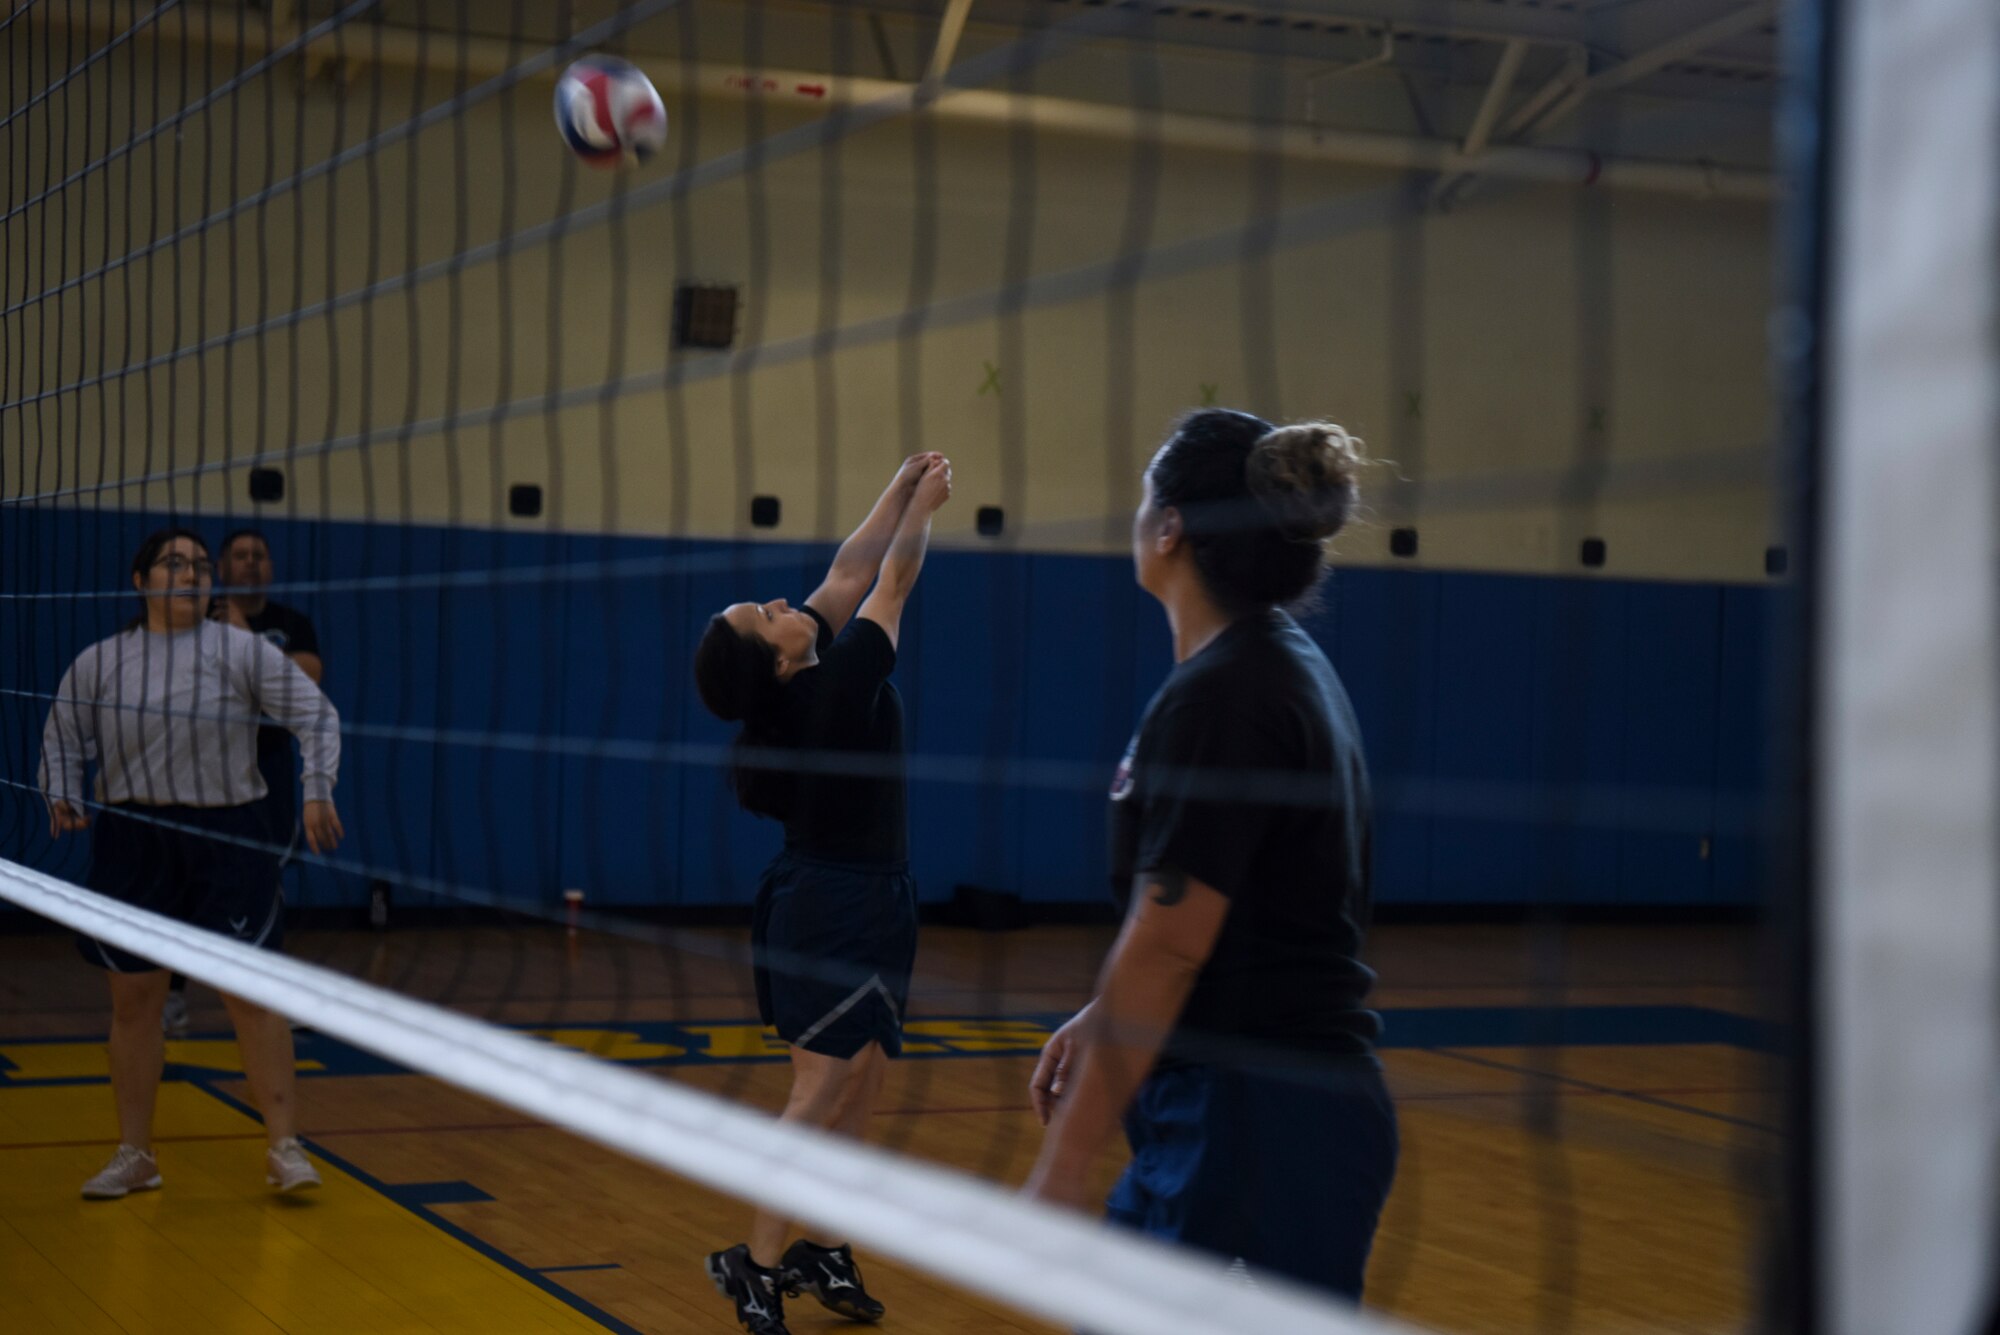 U.S. Air Force Tech. Sgt. Avery Hooper, 8th Operations Support Squadron intelligence analysis section chief, passes a volleyball over the net during the 2018 US-ROKAF Friendship Day at Kunsan Air Base, Republic of Korea, Nov. 9, 2018. Participants competed in a variety of sports and interactive events, such as basketball, volleyball, League of Legends, golf, bowling, and soccer. (U.S. Air Force photo by Senior Airman Savannah L. Waters)